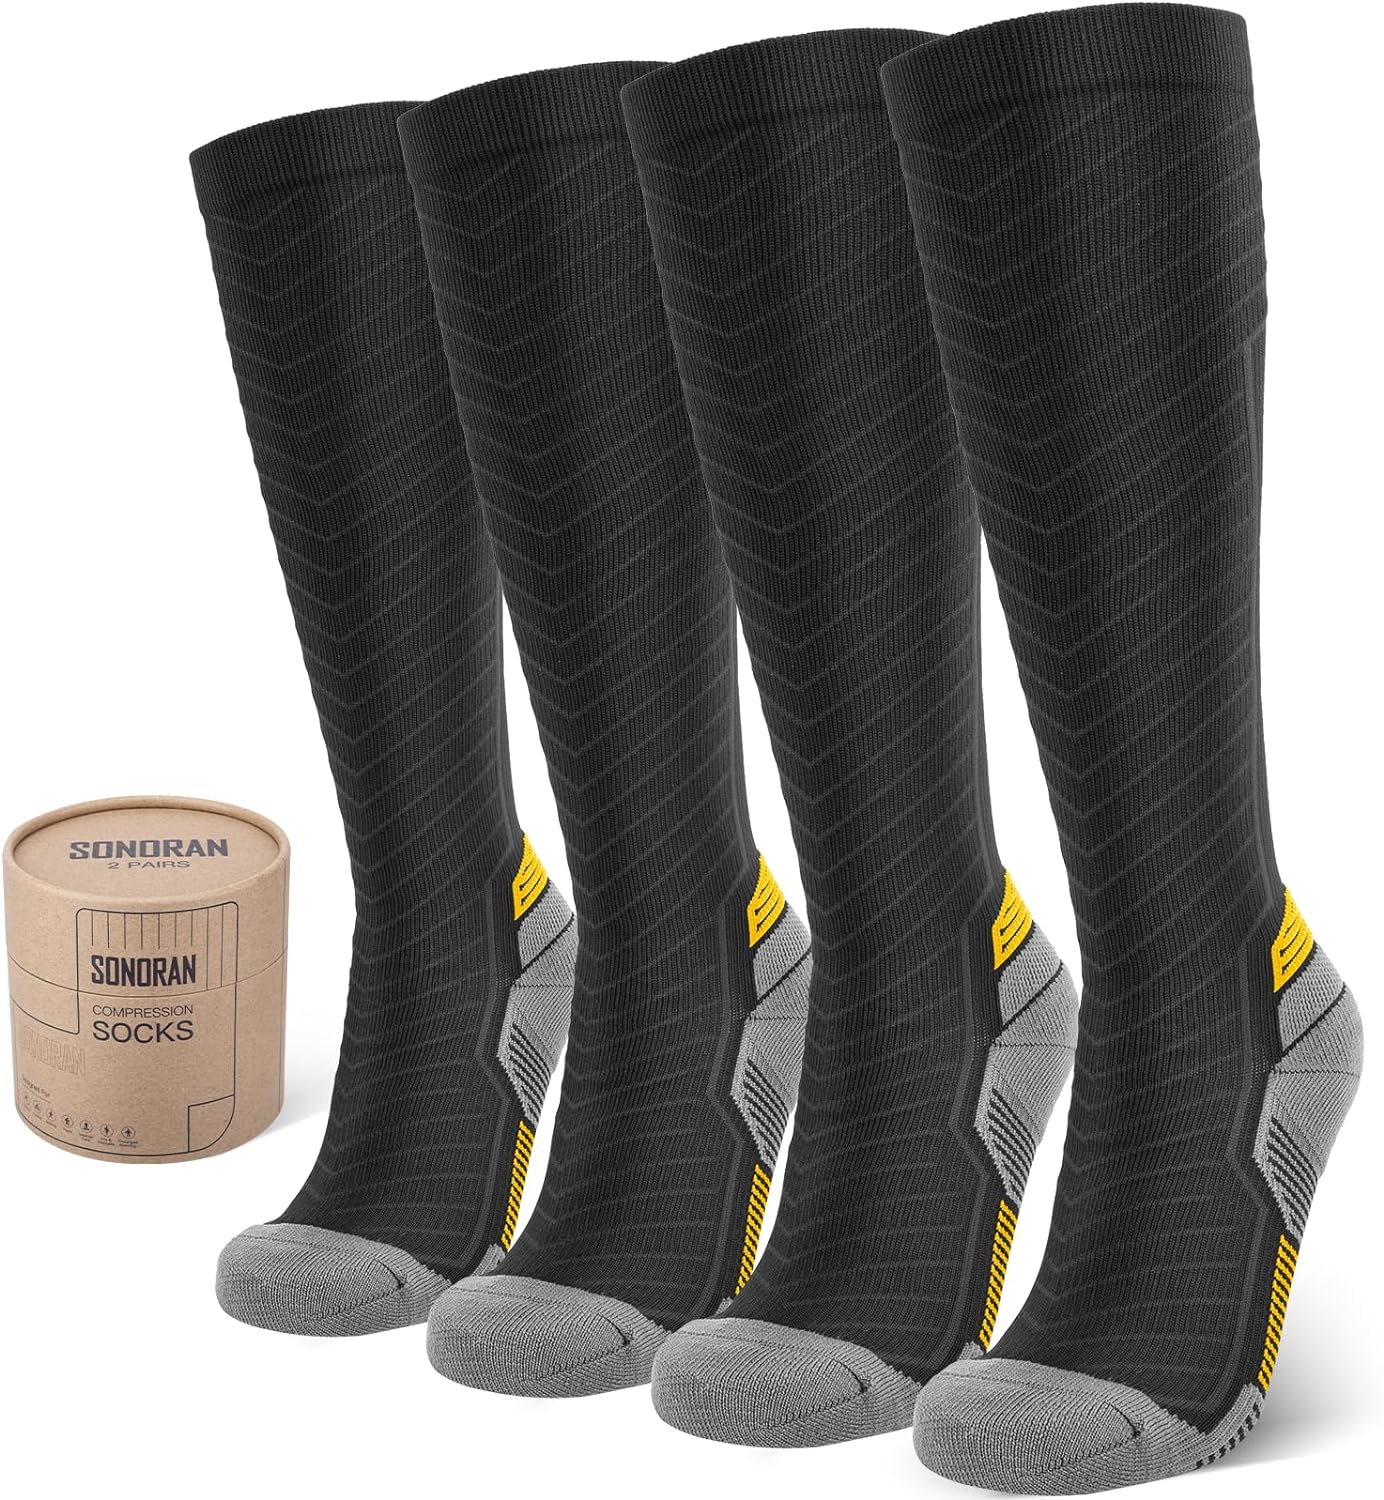 Go! Hottest Amazon Deal Today! SONORAN Compression Socks for Men - Limited Stock!